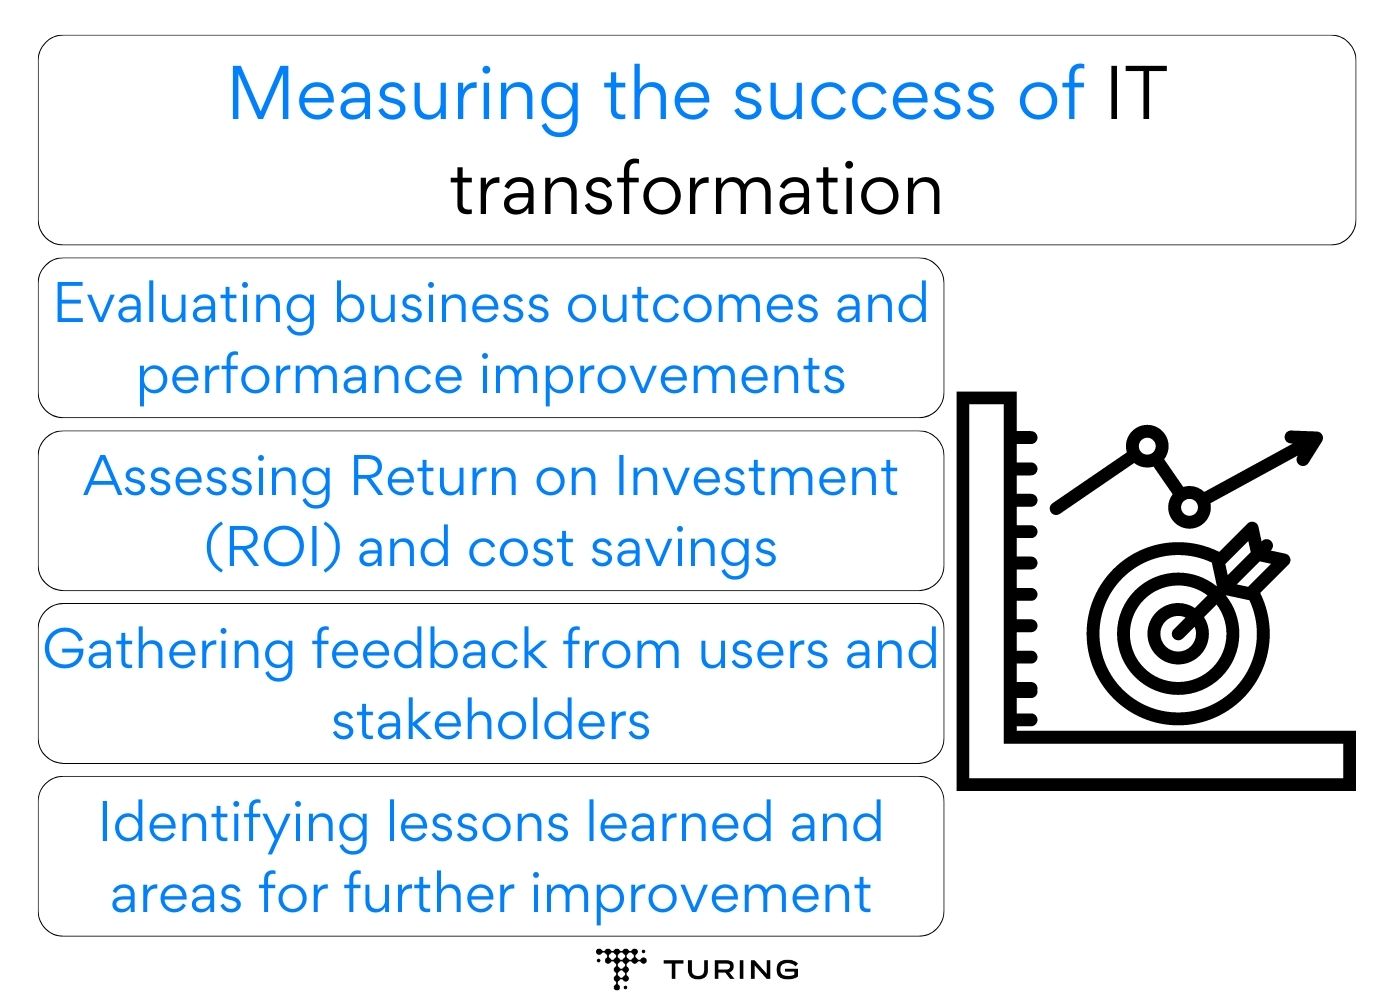 Measuring the success of IT transformation strategy